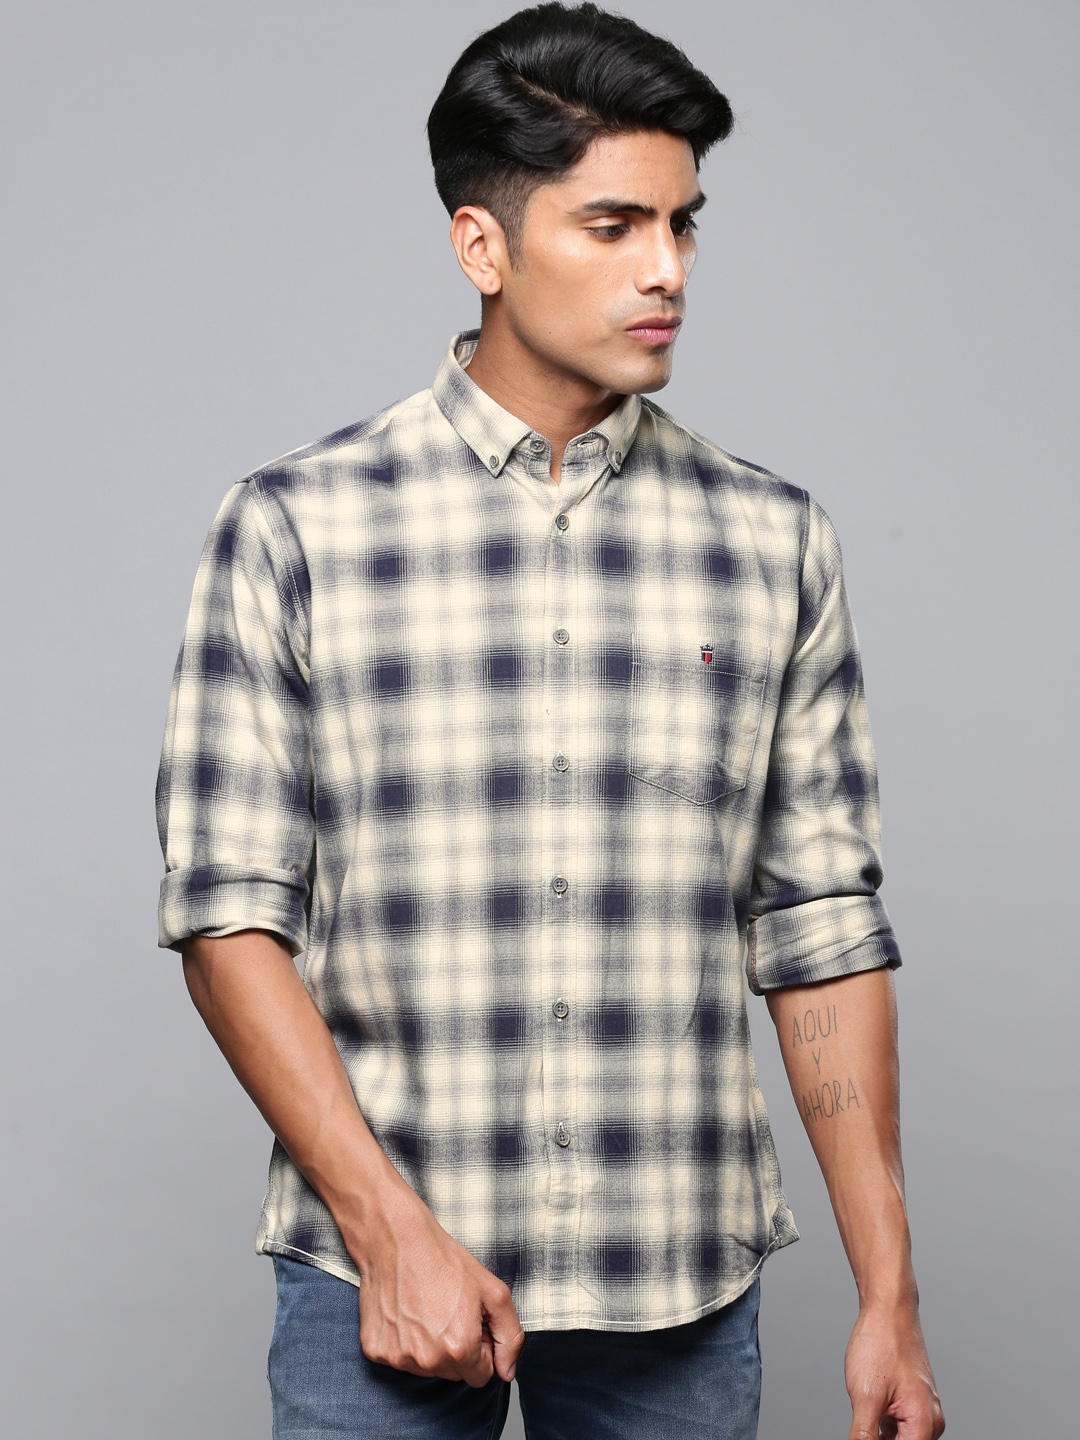 Louis Philippe Jeans Casual Shirts : Buy Louis Philippe Jeans